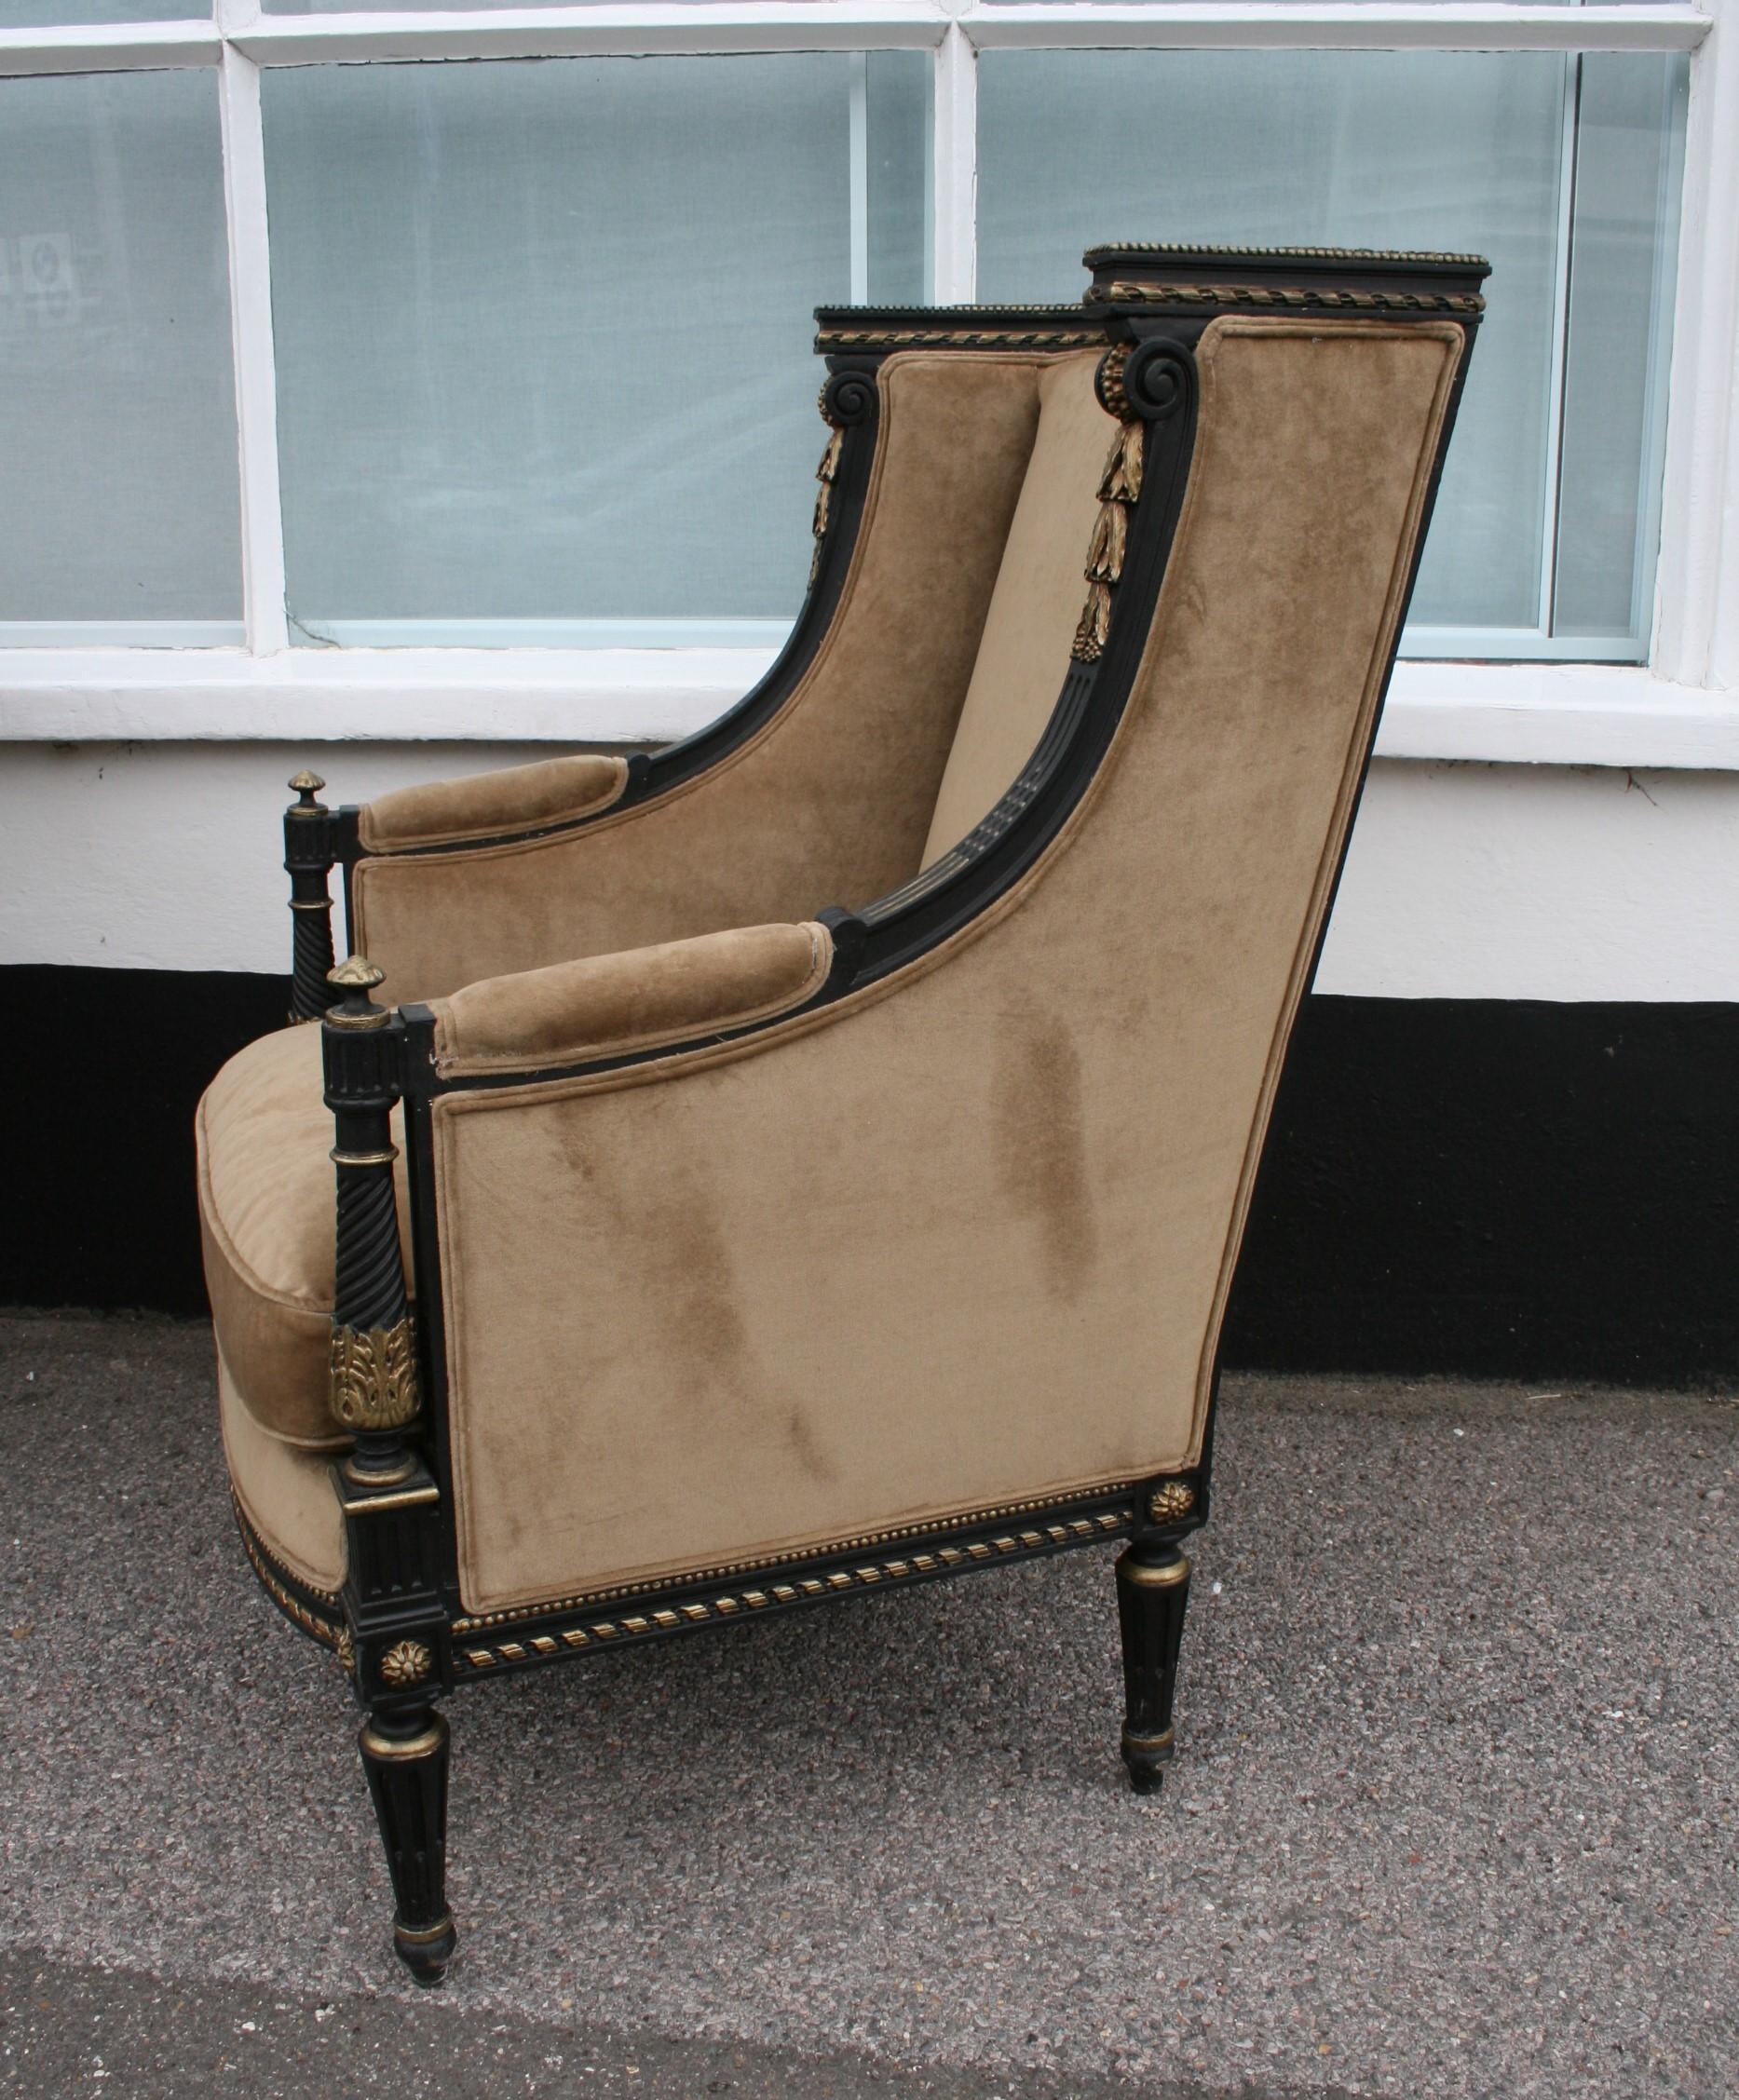 A very well carved pair of French armchairs in ebonized and gilt finish, newly recovered in an old gold velvet, complete with new feather cushions.